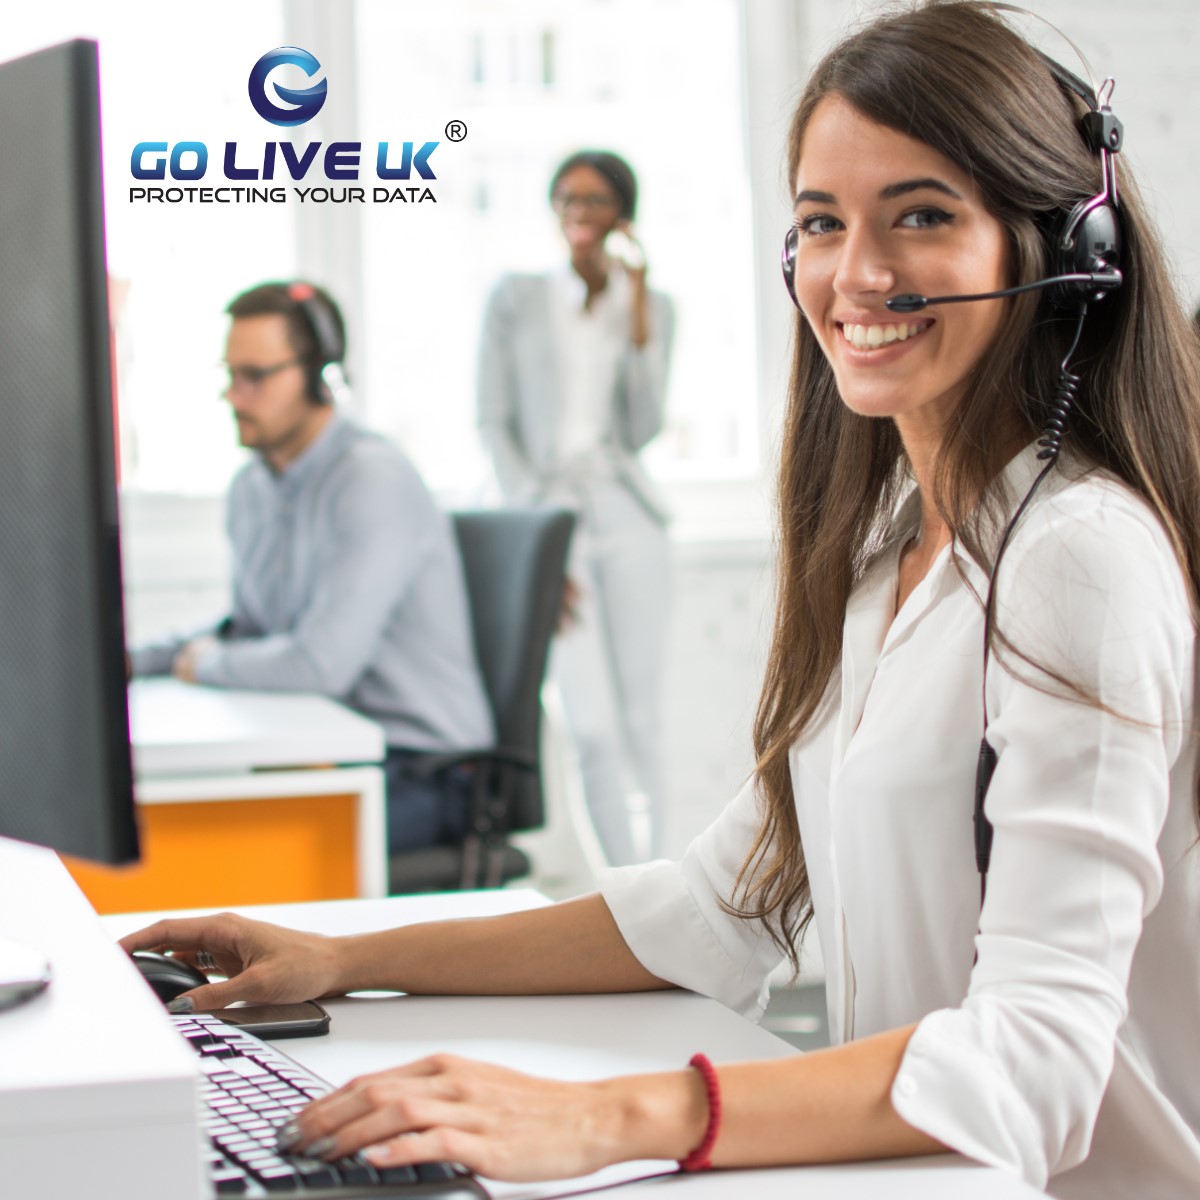 Main image for Go Live UK Ltd. IT Support in London | IT helpdesk | Managed IT services 